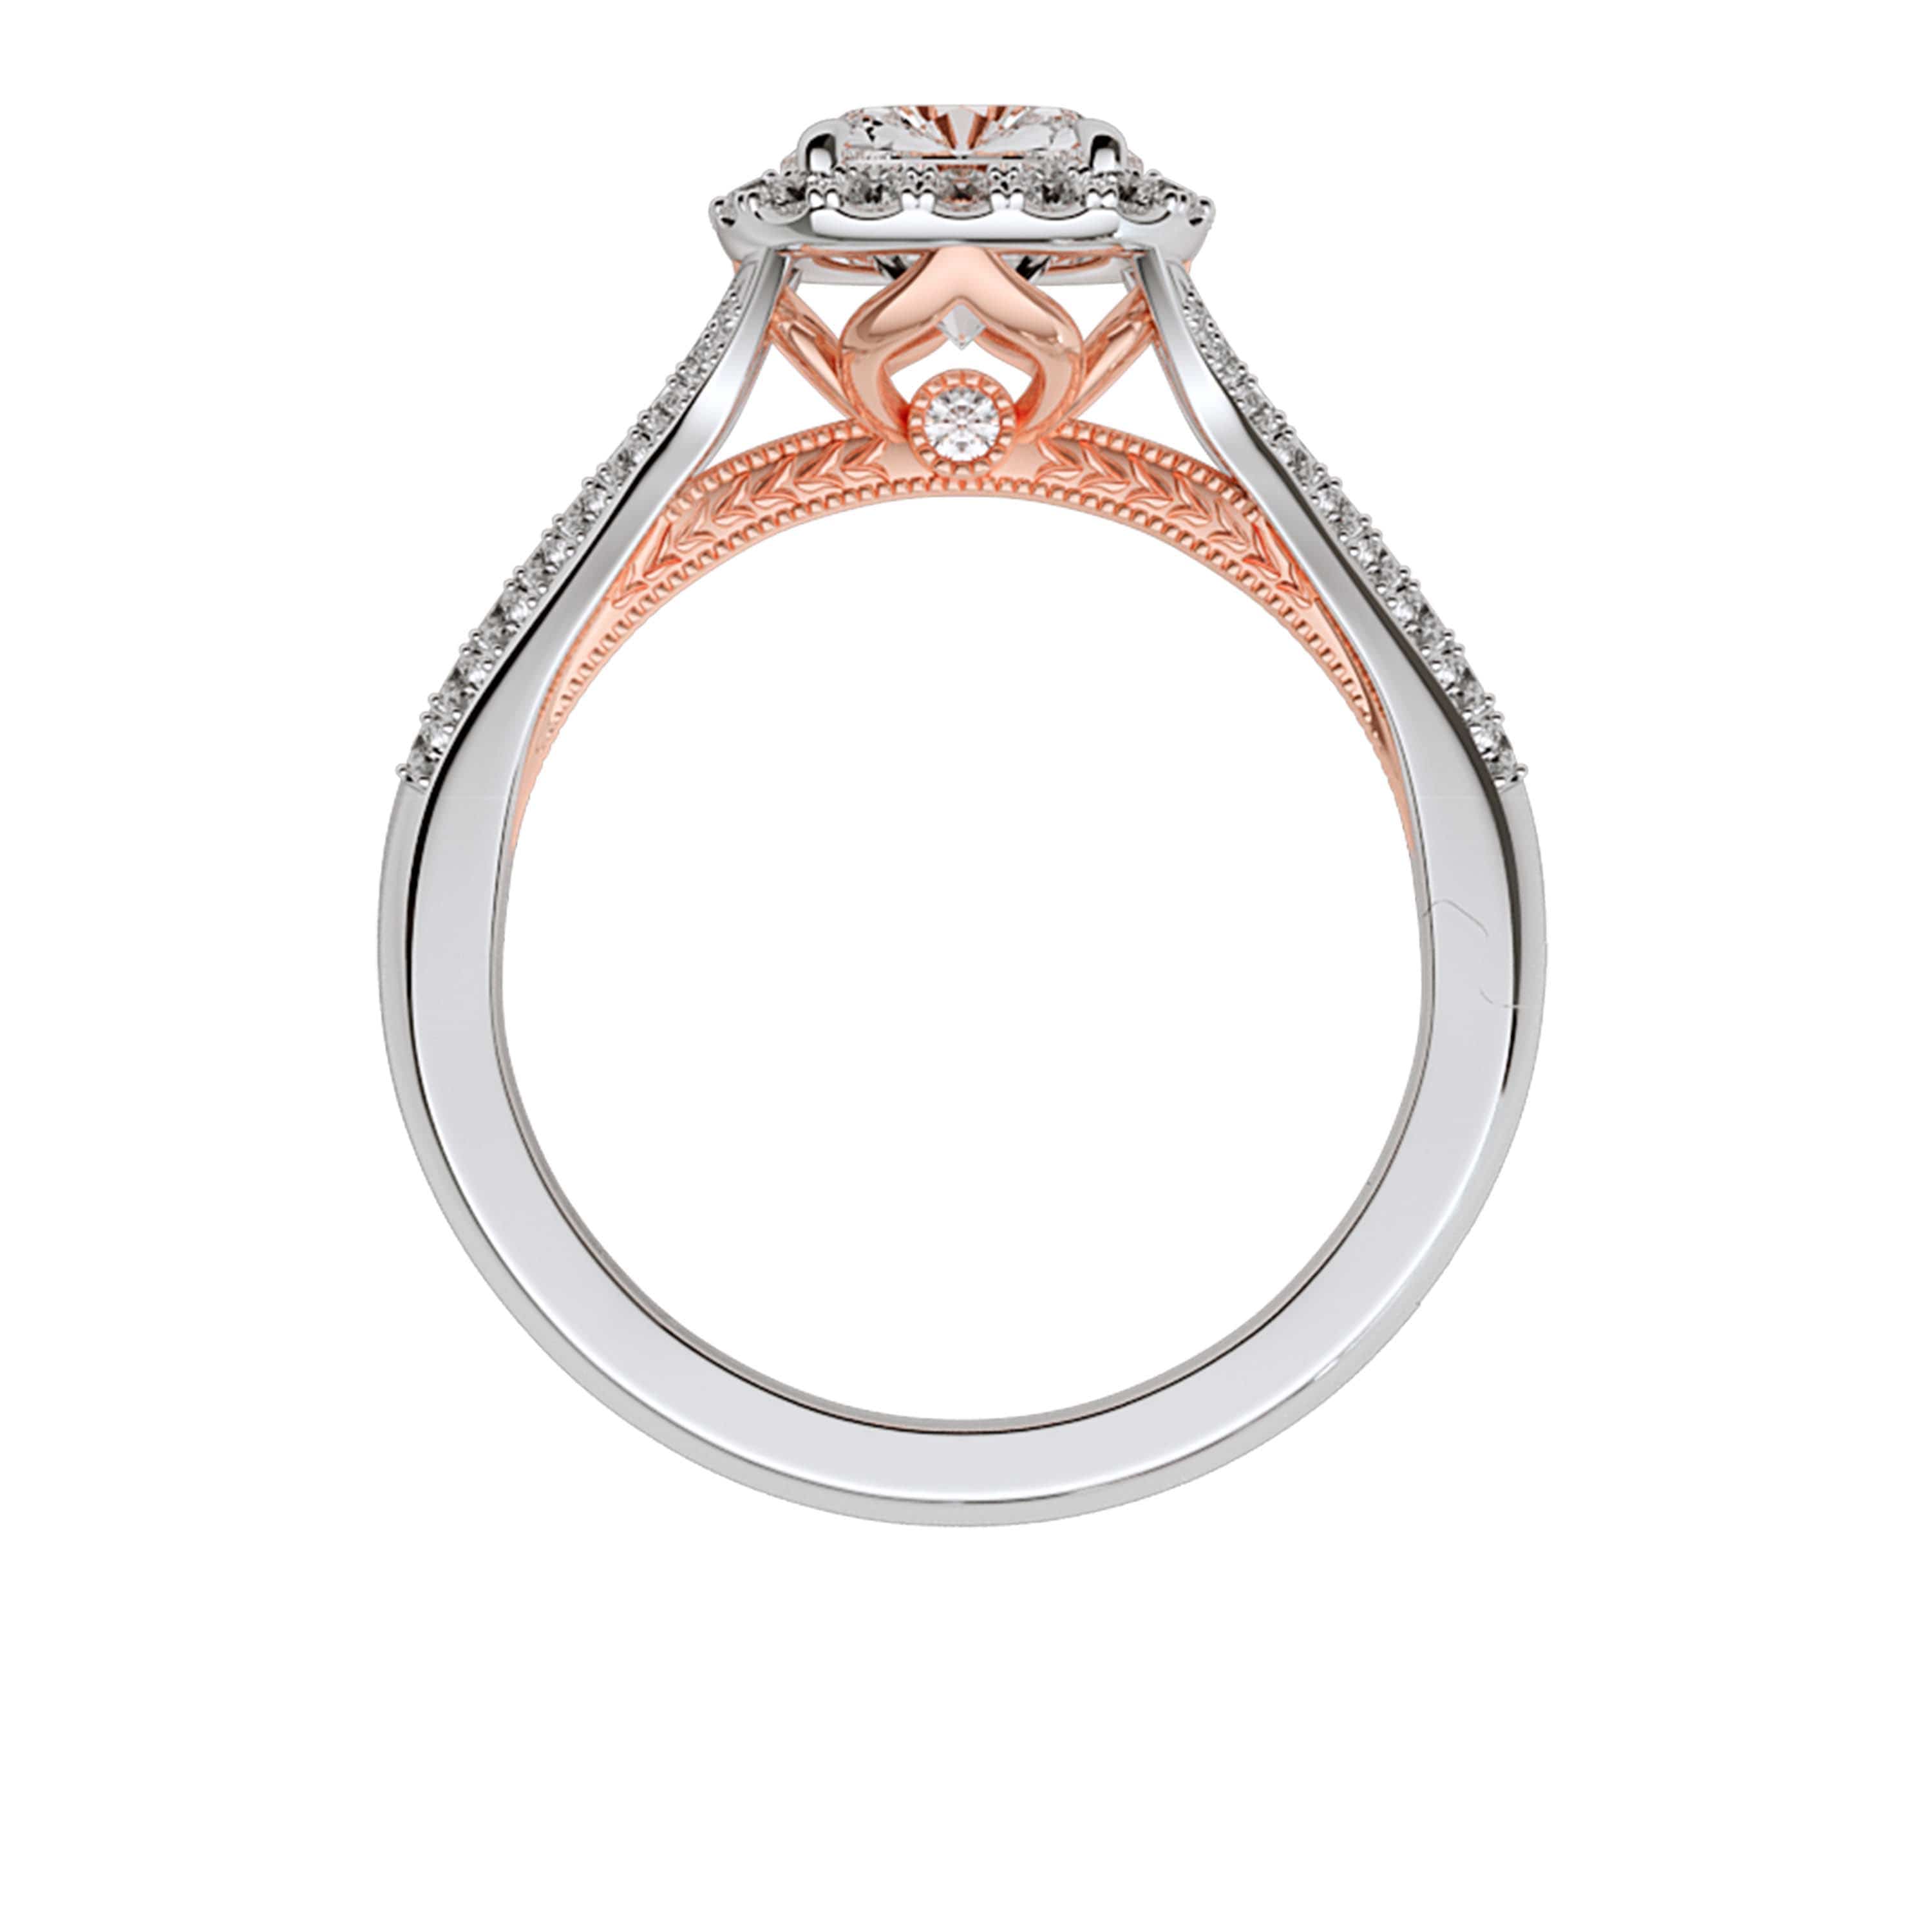 CLIQ Jewelry  You deserve a ring that fits